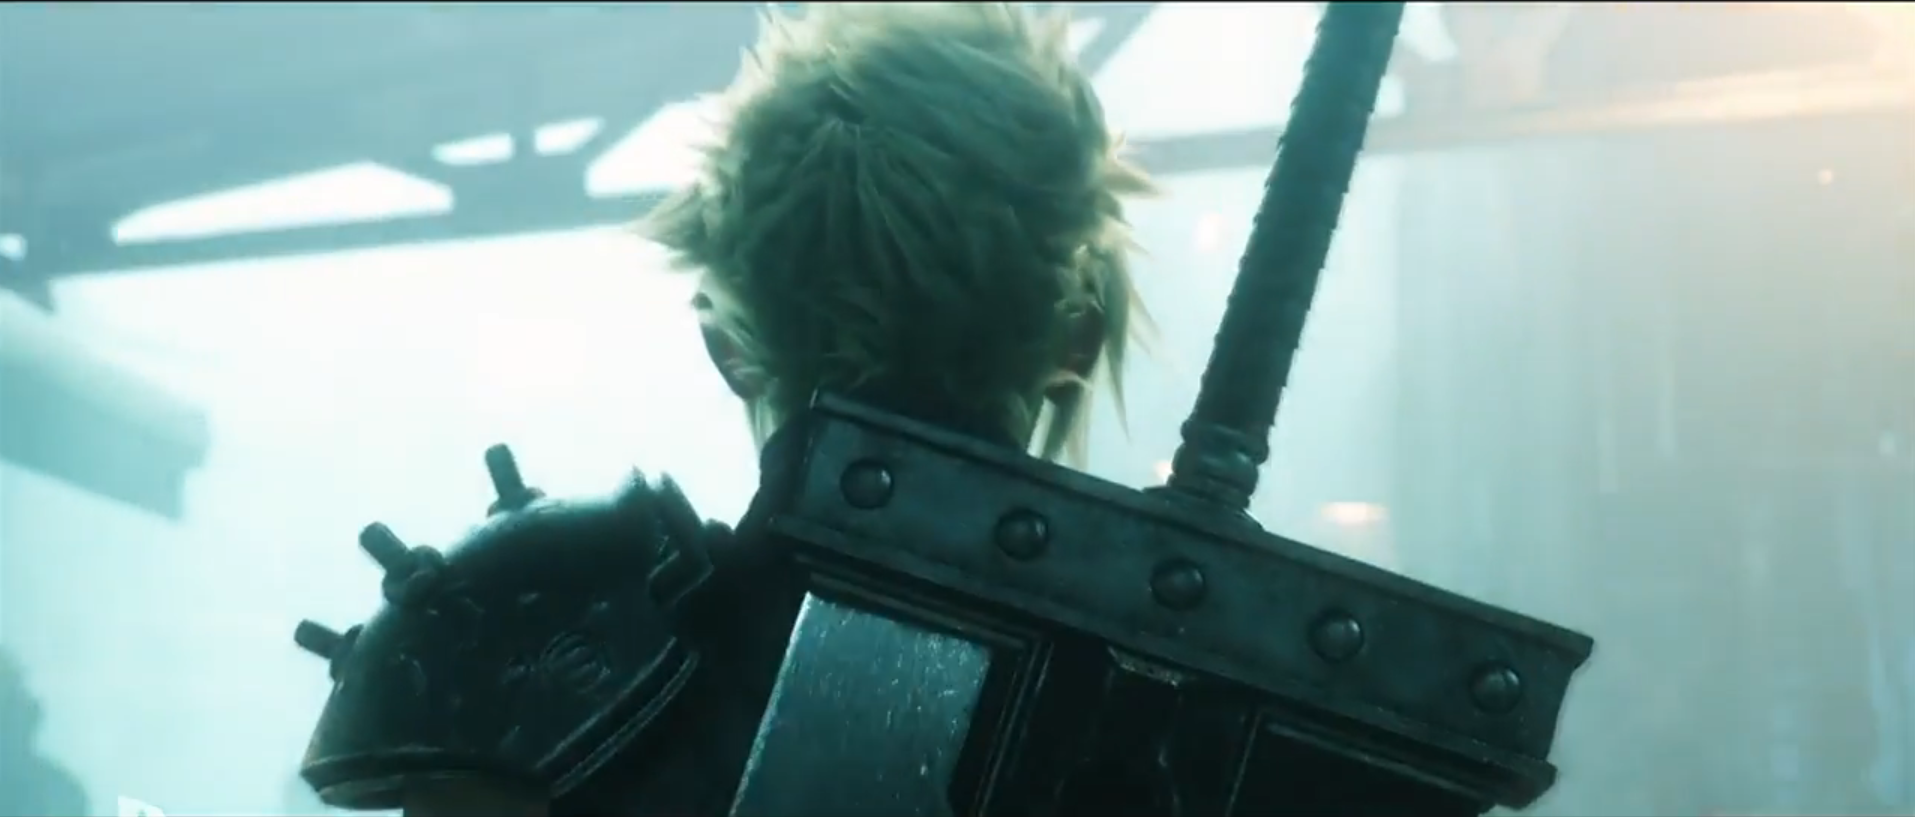 E3 2015: Remember that Final Fantasy VII Remake You Wanted? It's Coming